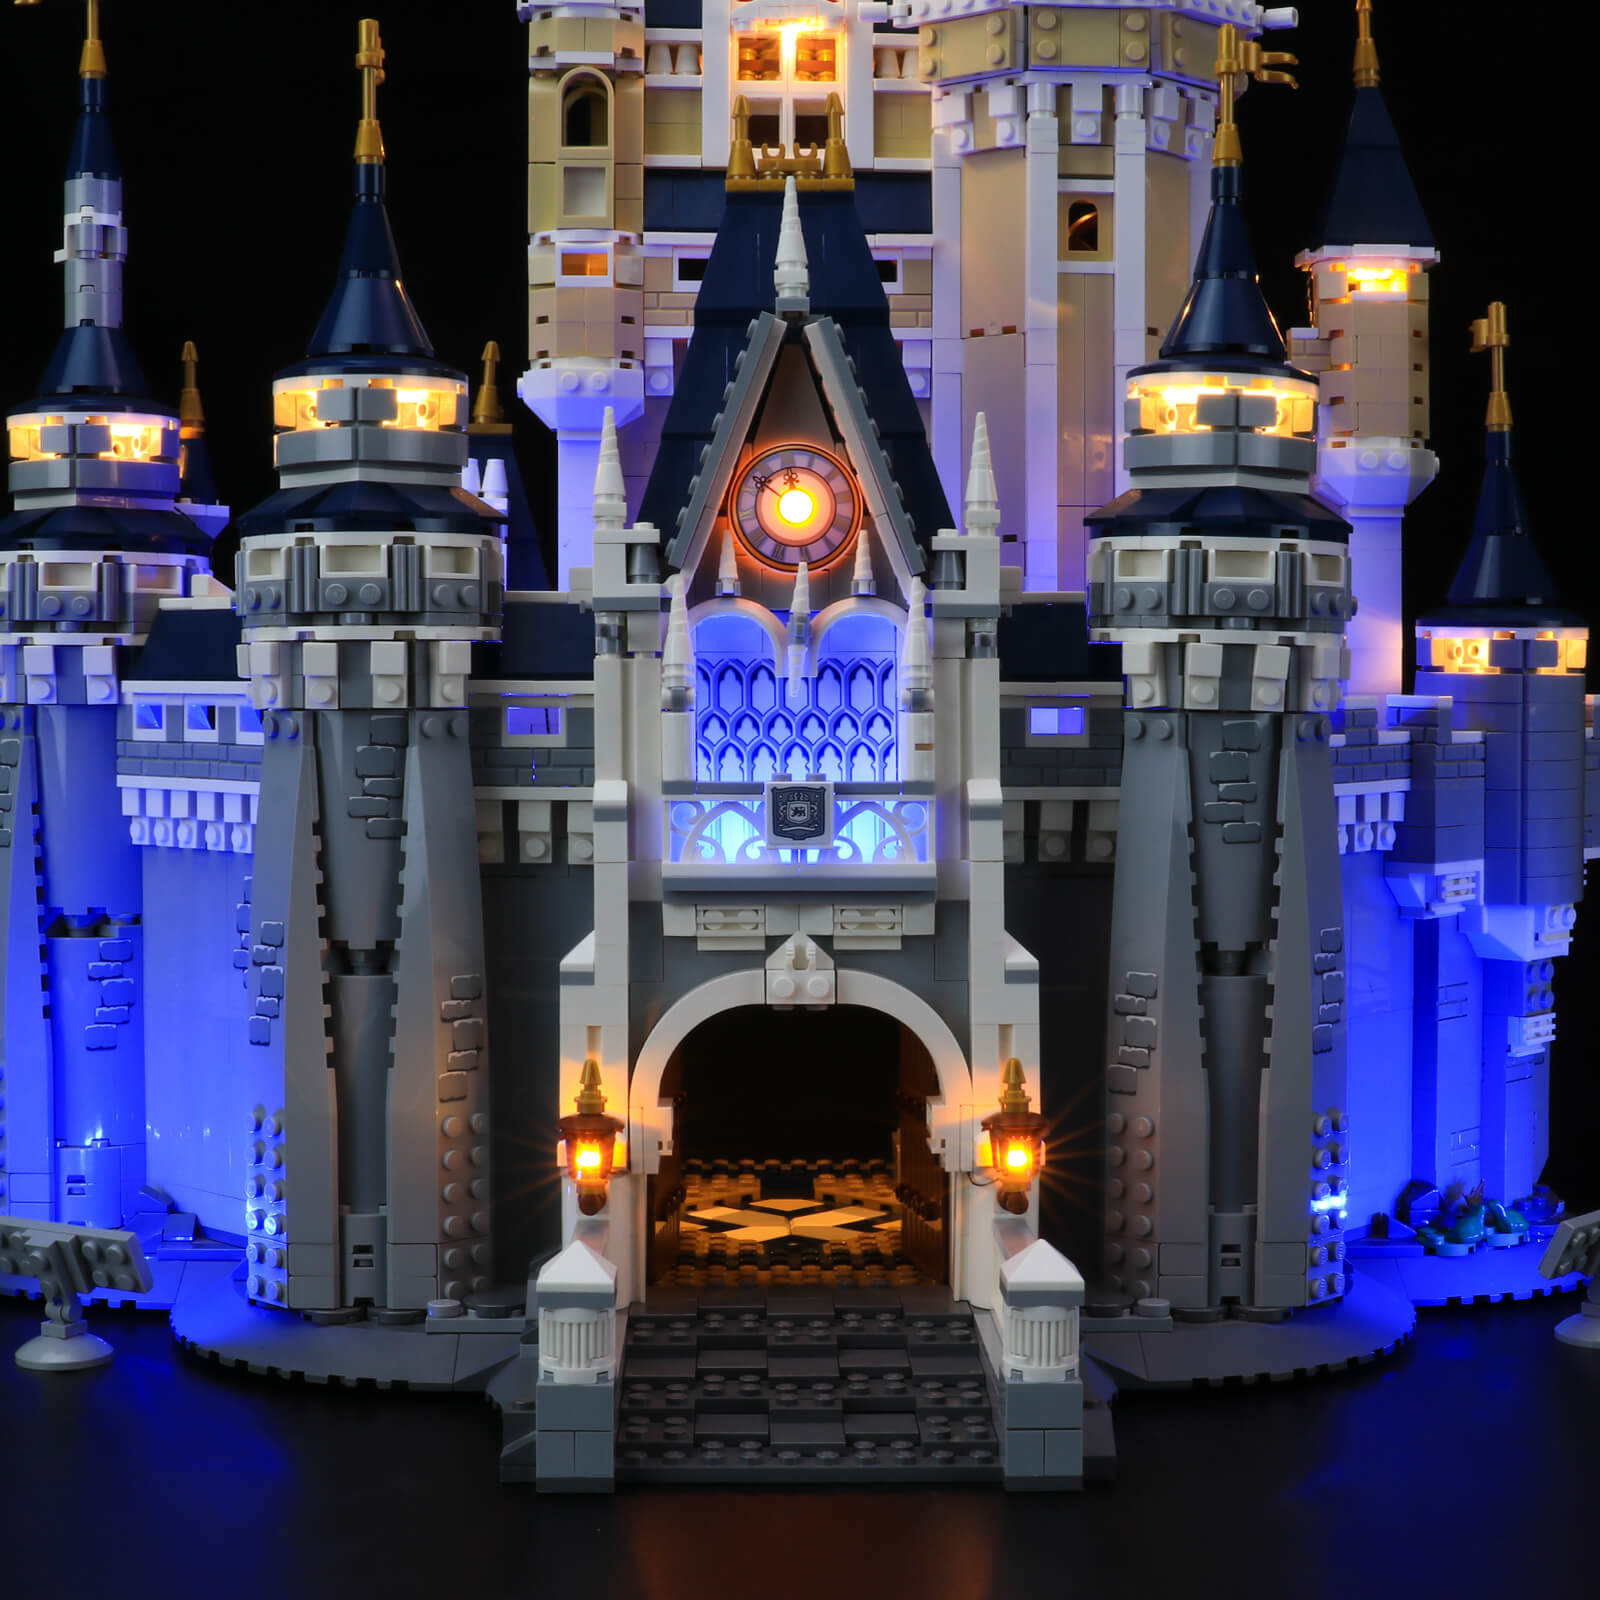 Light Kit For The Disney Castle 71040 (With Remote)